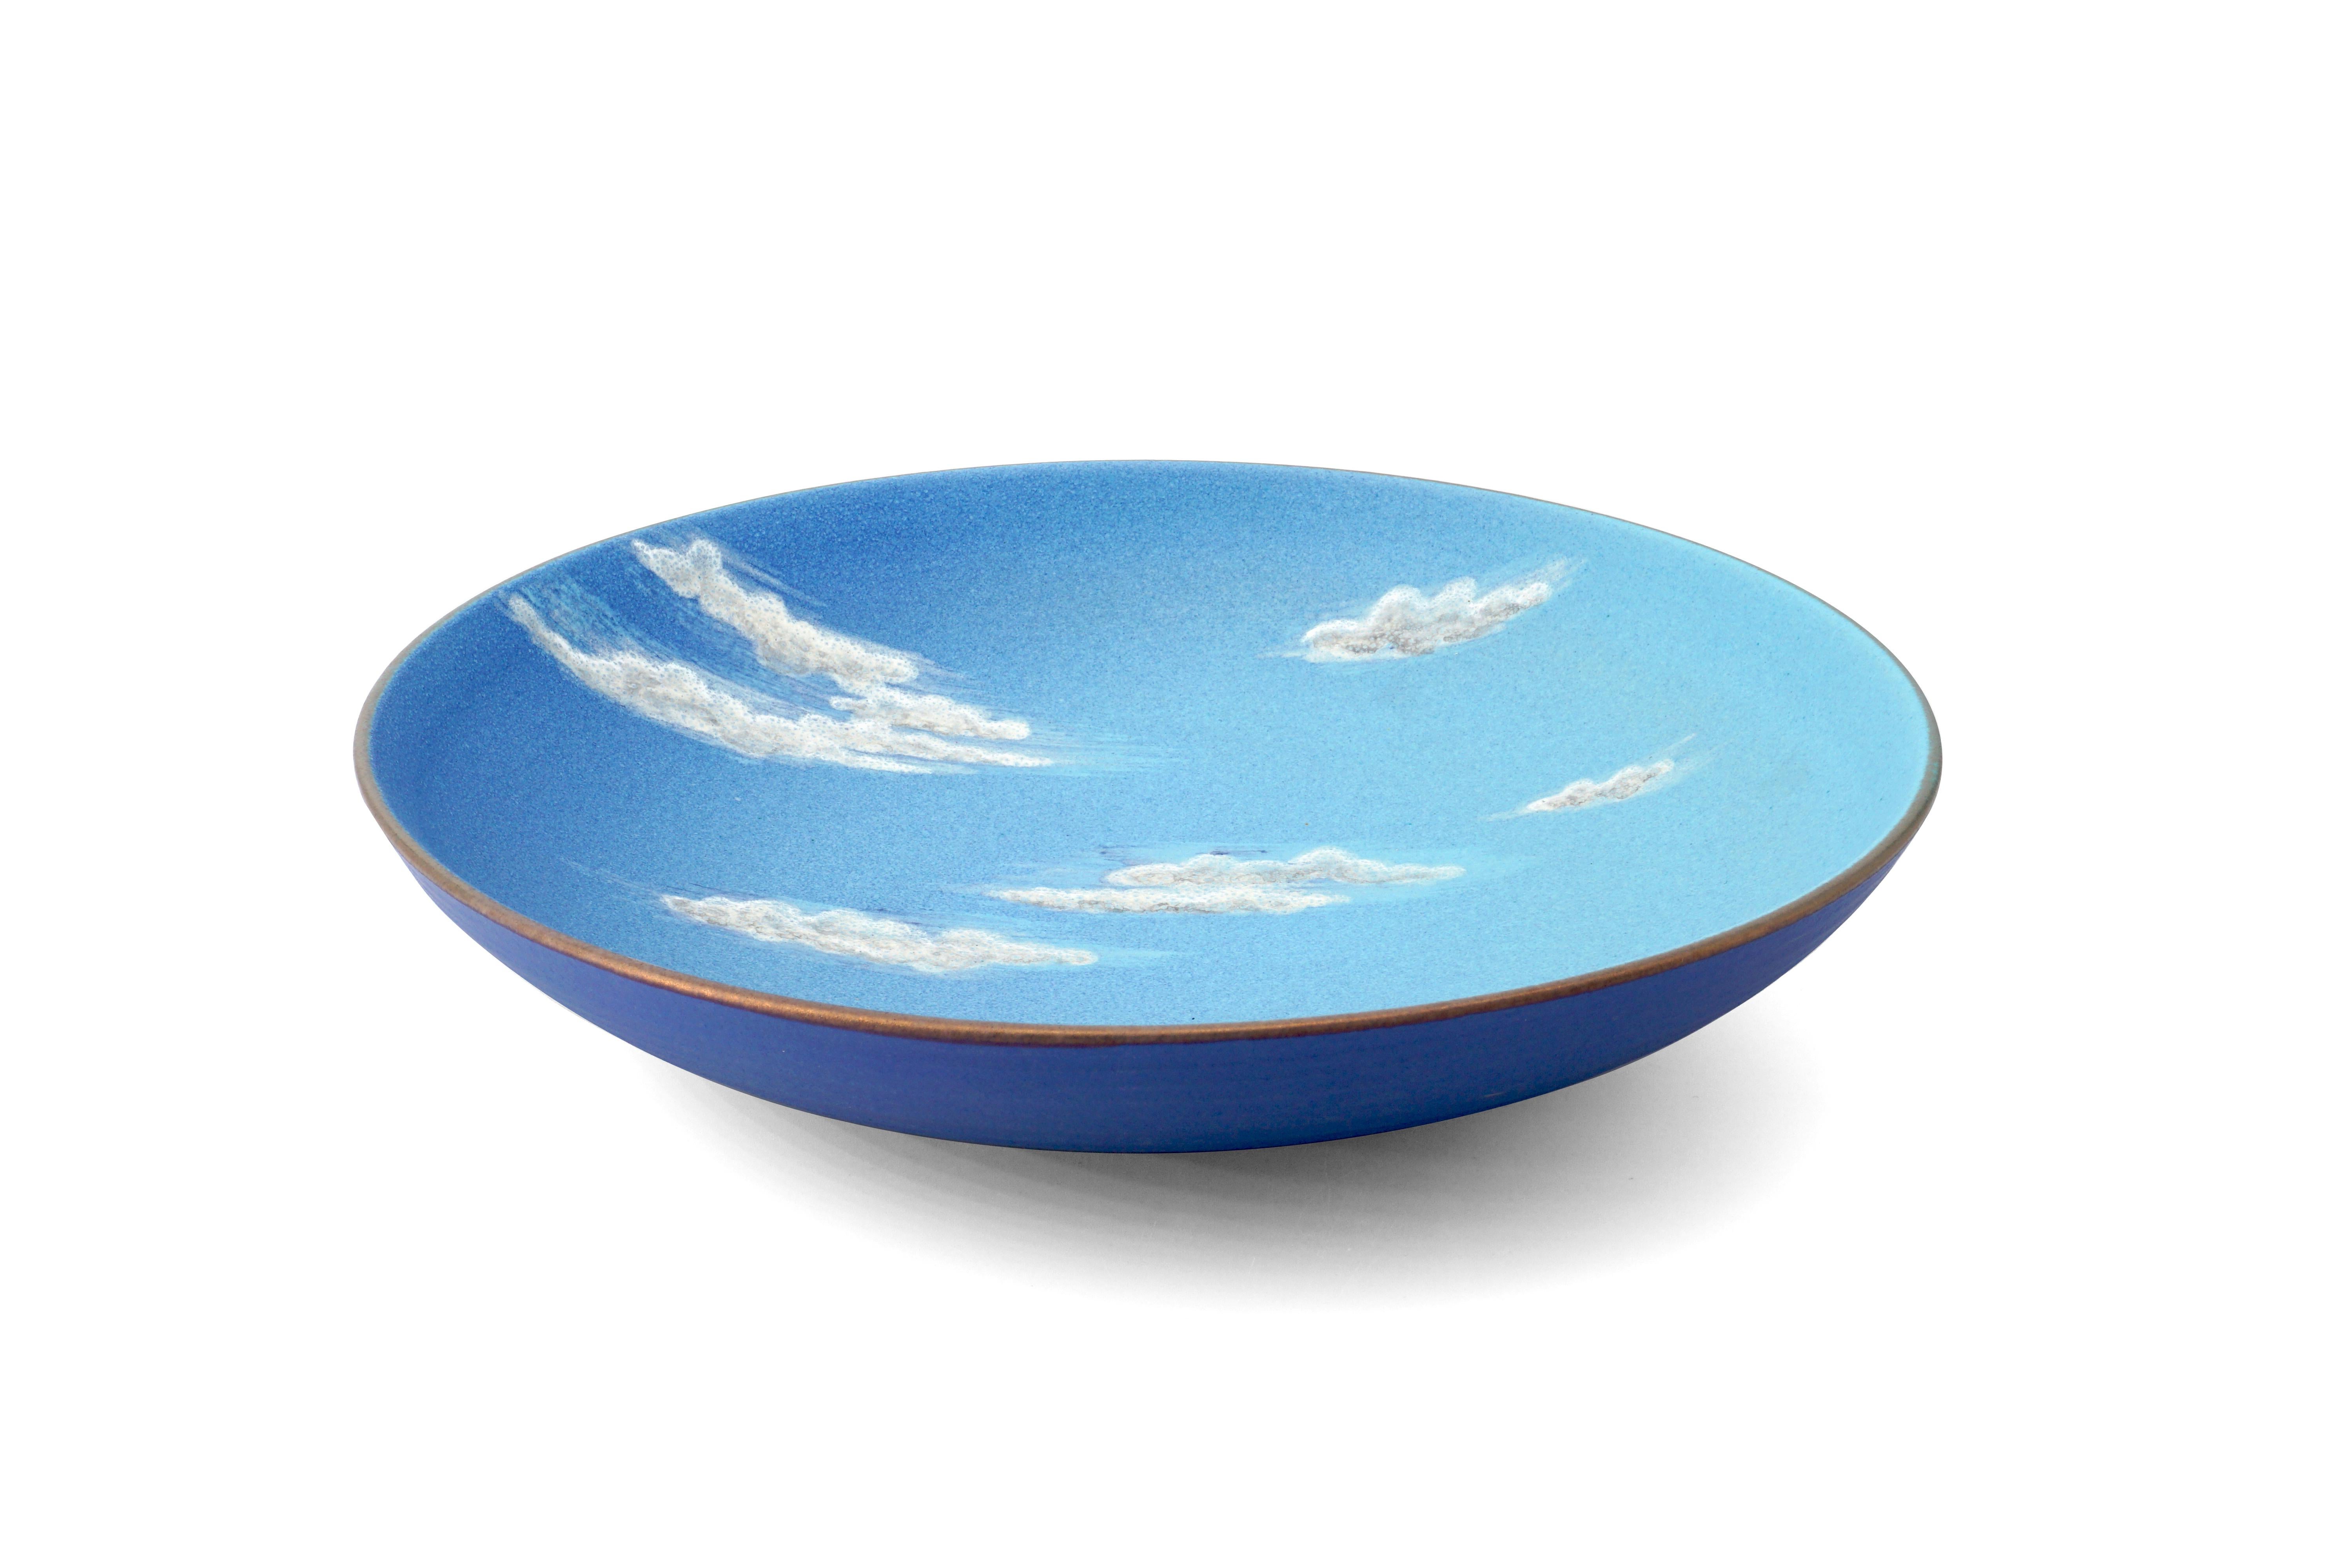 SKY - Large ceramic bowl by Pantoù Ceramics, hand thrown and hand painted glazed earthenware. 
All unique pieces, Italy, 2021. Measure: 30cm diameter. 

Different finishes available for the bowl exterior: purple, grey, light green or shiny copper